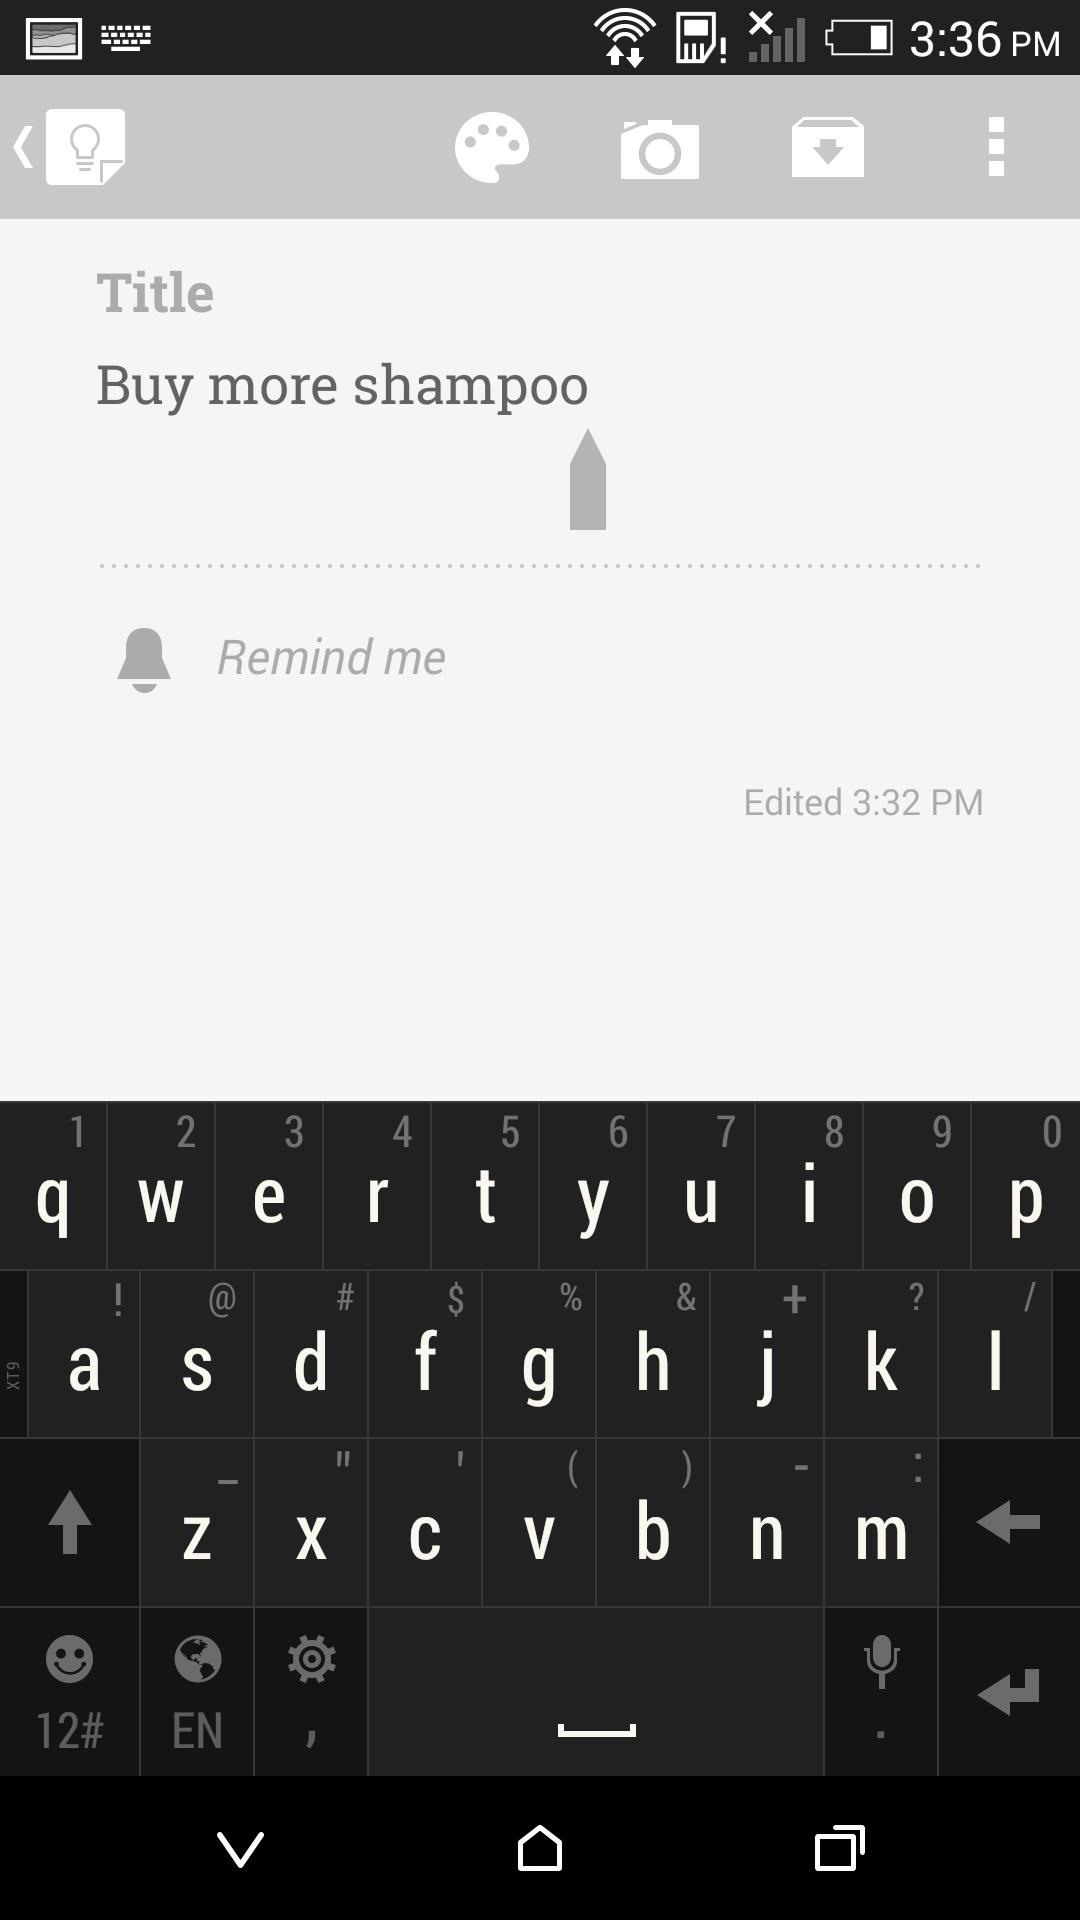 How to Change the Action Bar of Google Keep on Android for Easier Deleting & Sharing